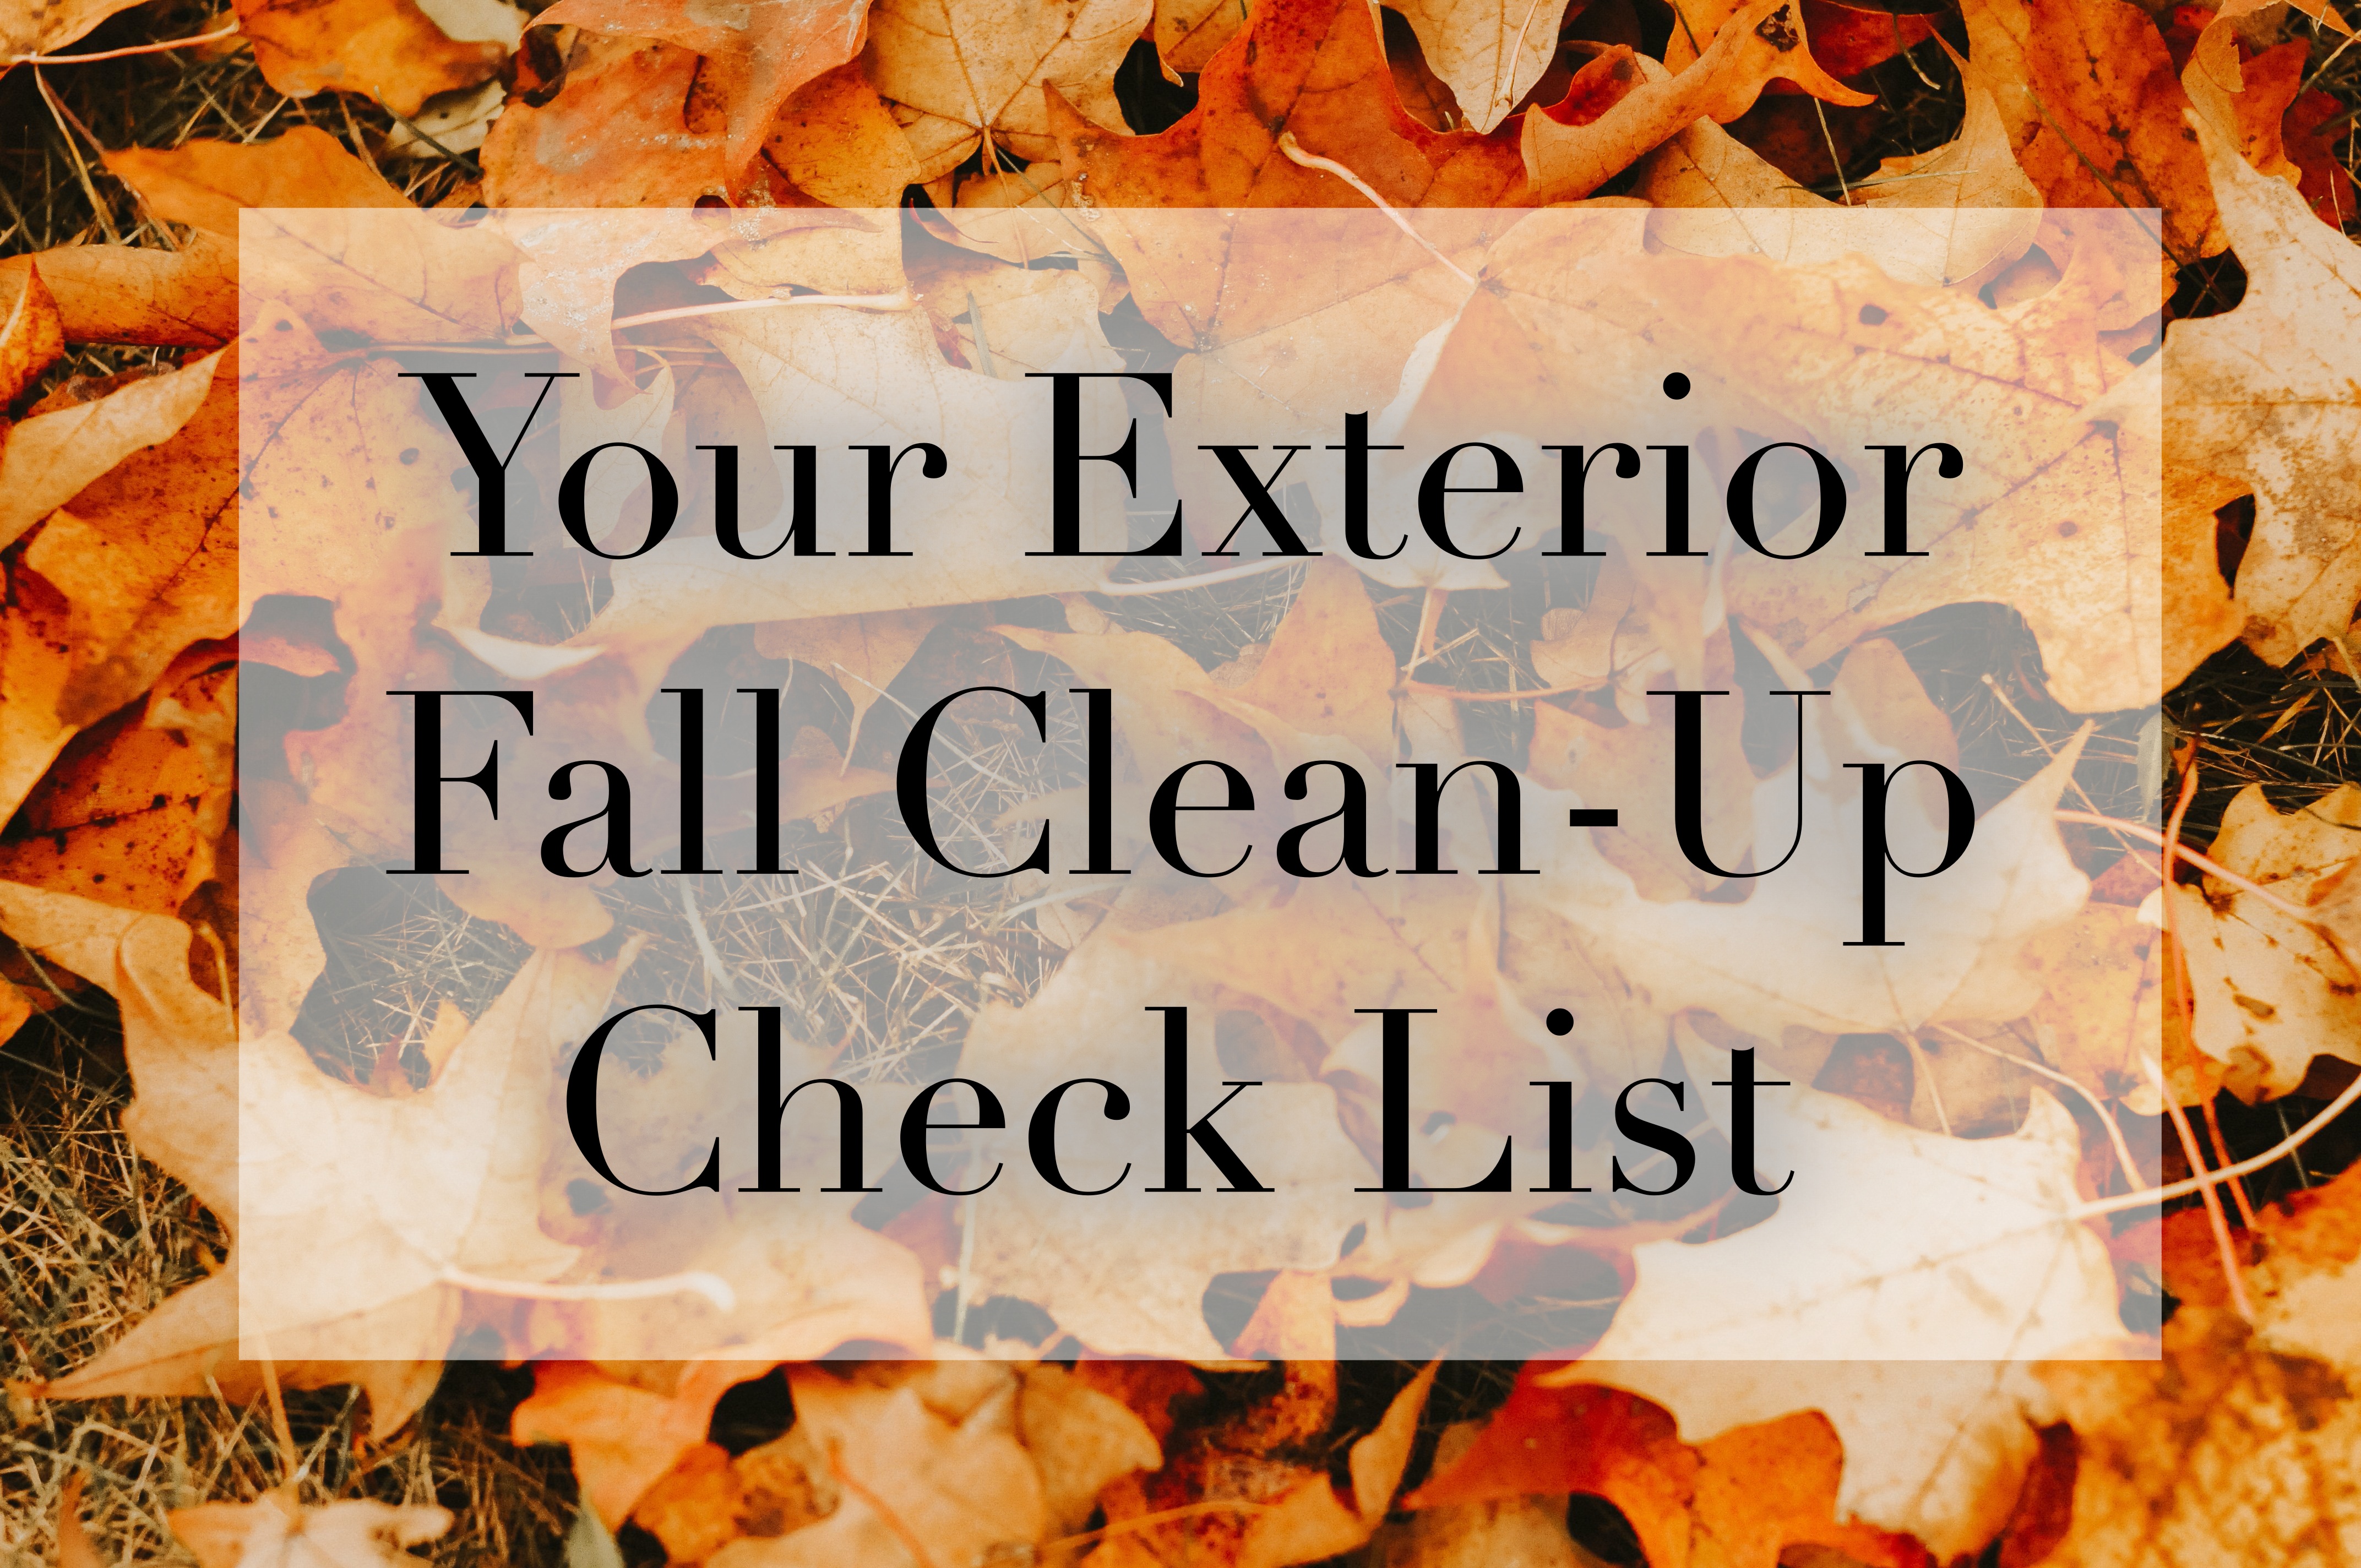 Your Exterior Fall Clean-Up Check List